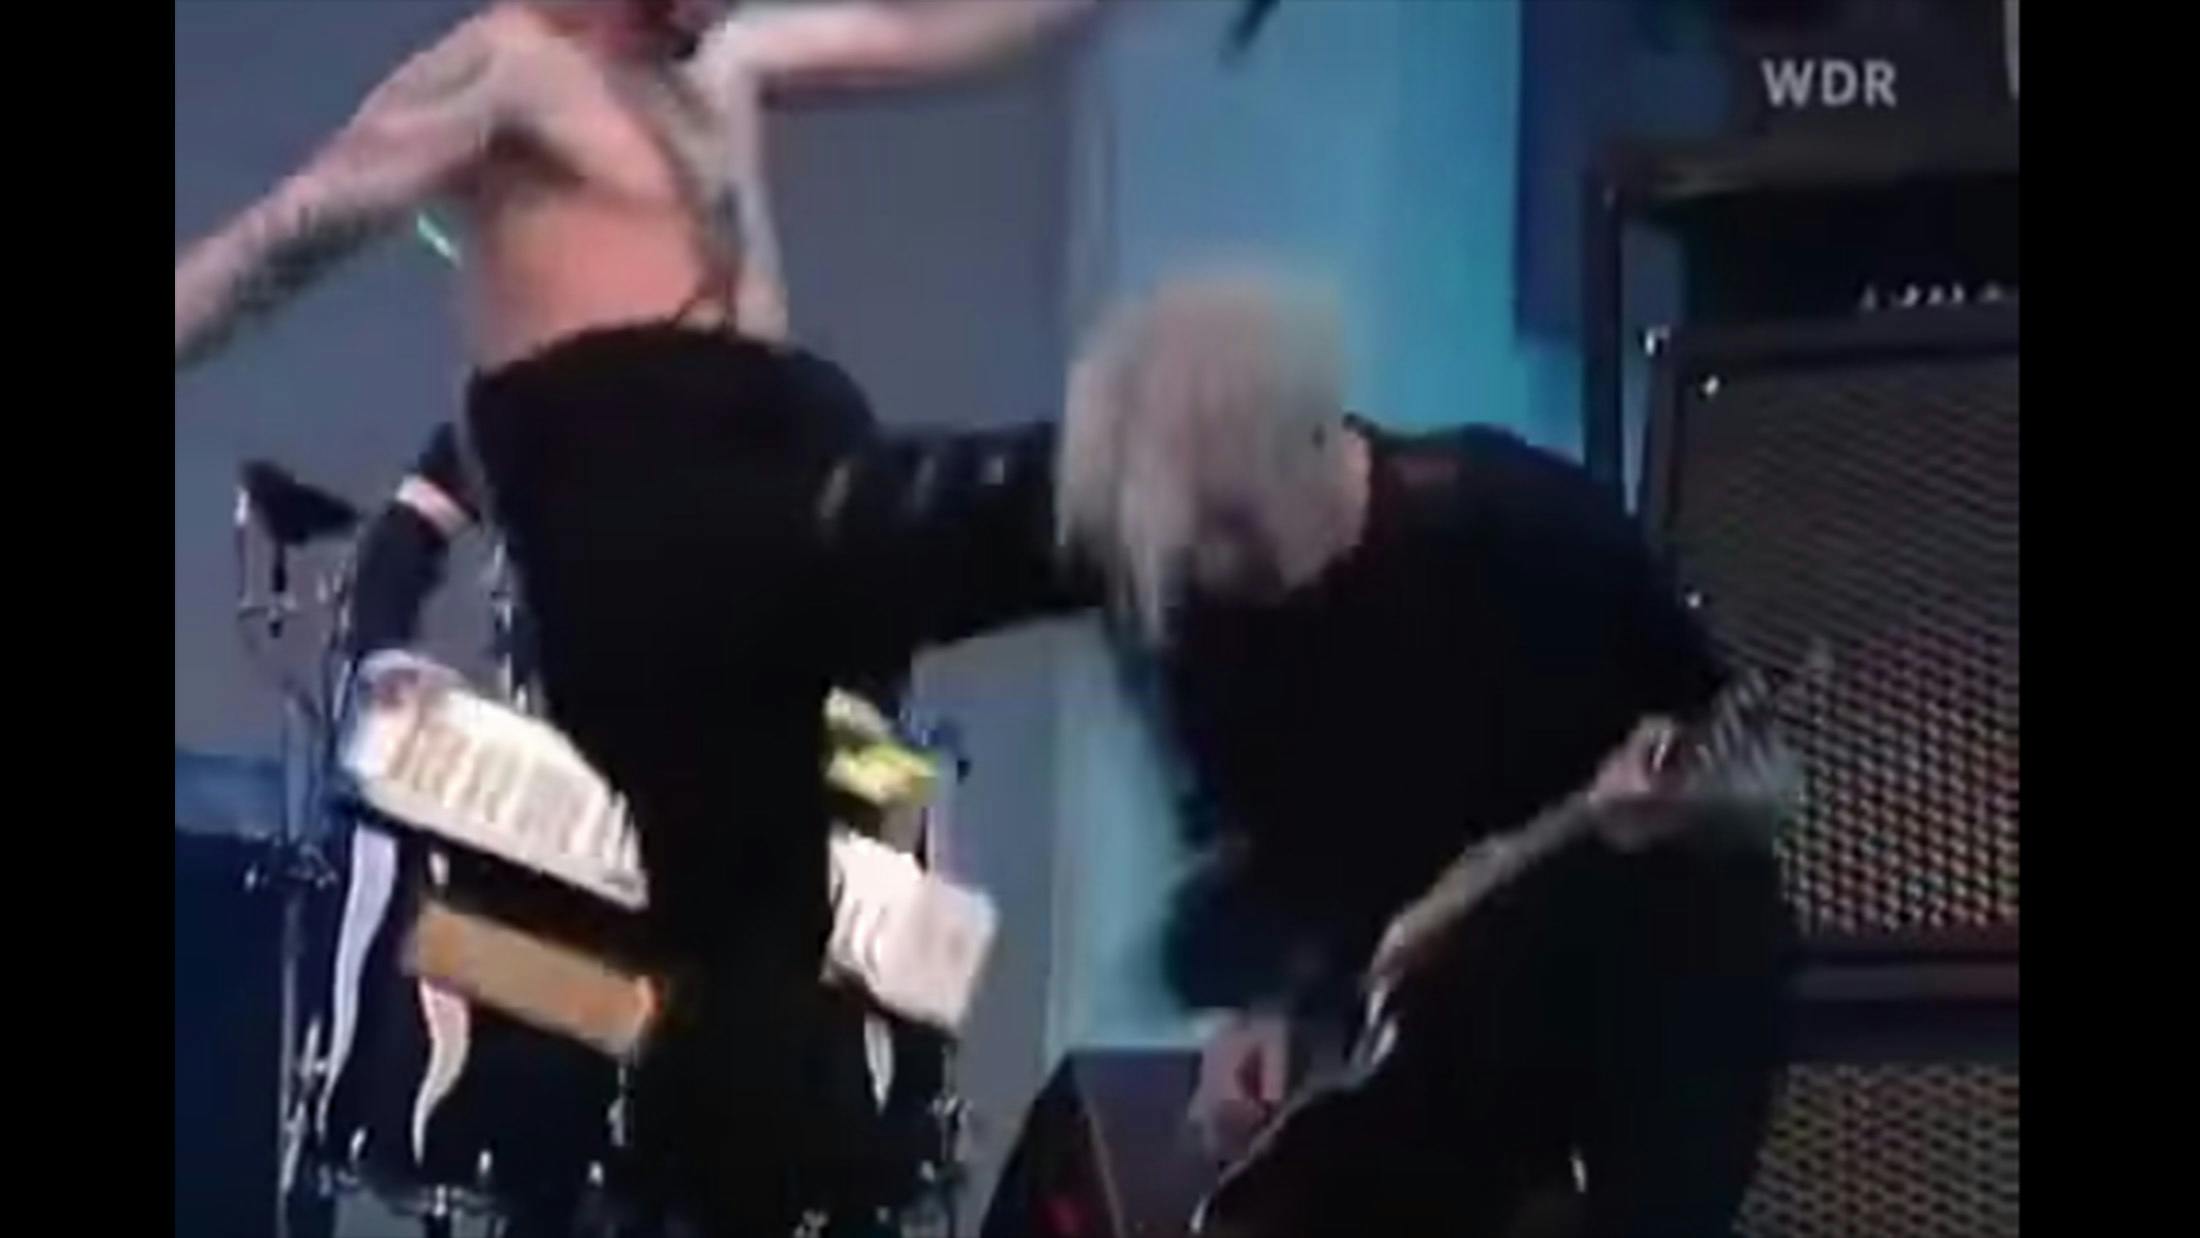 At Rock am Ring in 2003, during a performance of The Beautiful People, the God of Fuck deemed it necessary to run over to his guitarist, John 5, and give him a roundhouse to his guitar and chest. Because why not? Unsurprisingly, John 5 was not thrilled with Manson, and the pair got into a bit of a tiff onstage.